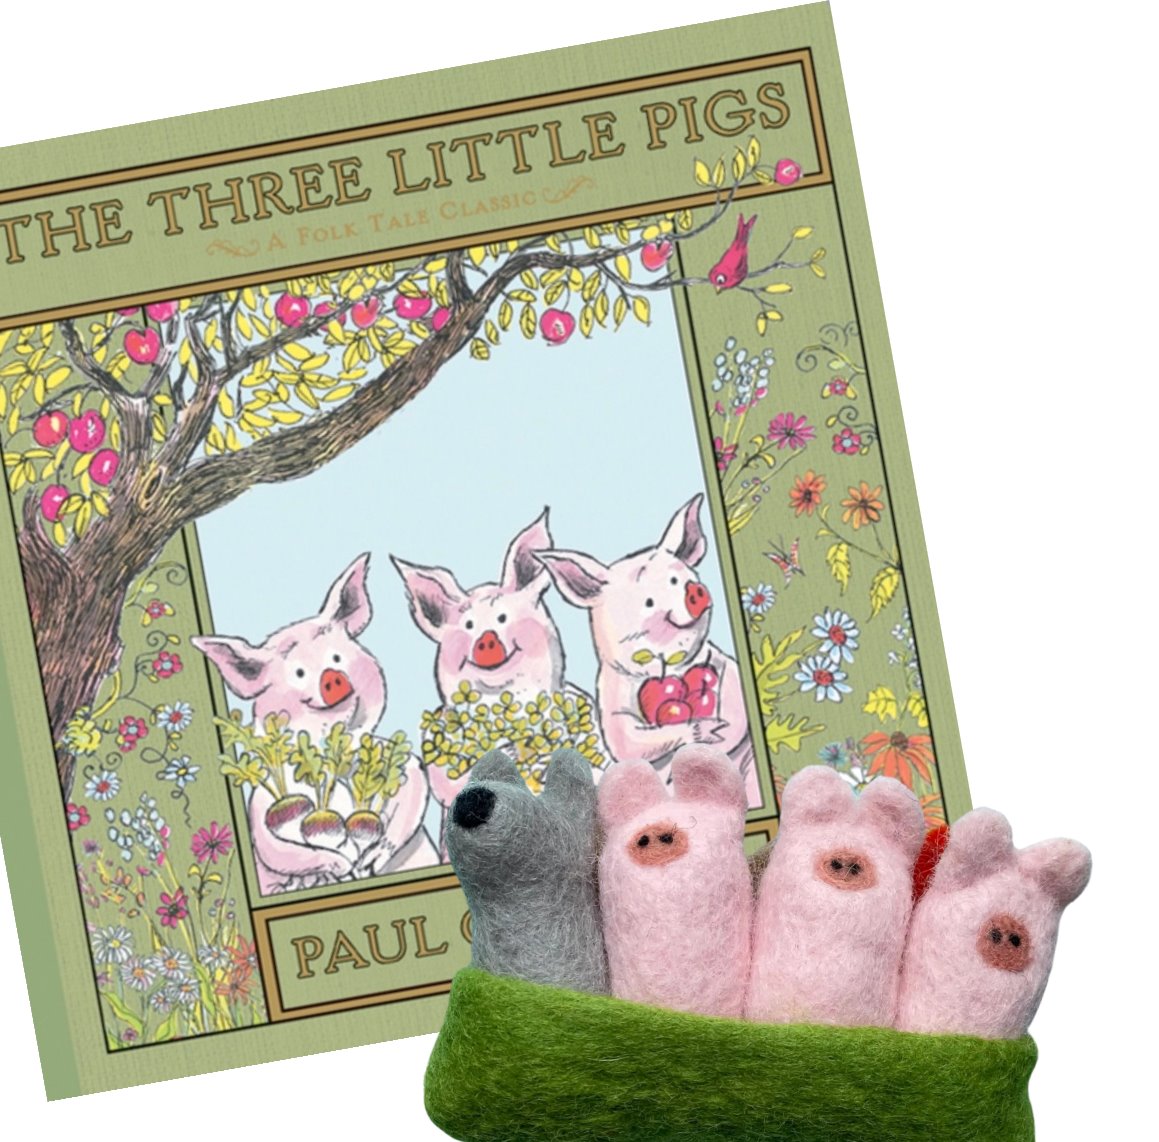 The Three Little Pigs, Storytelling Props and Book Gift Set - Alder & Alouette